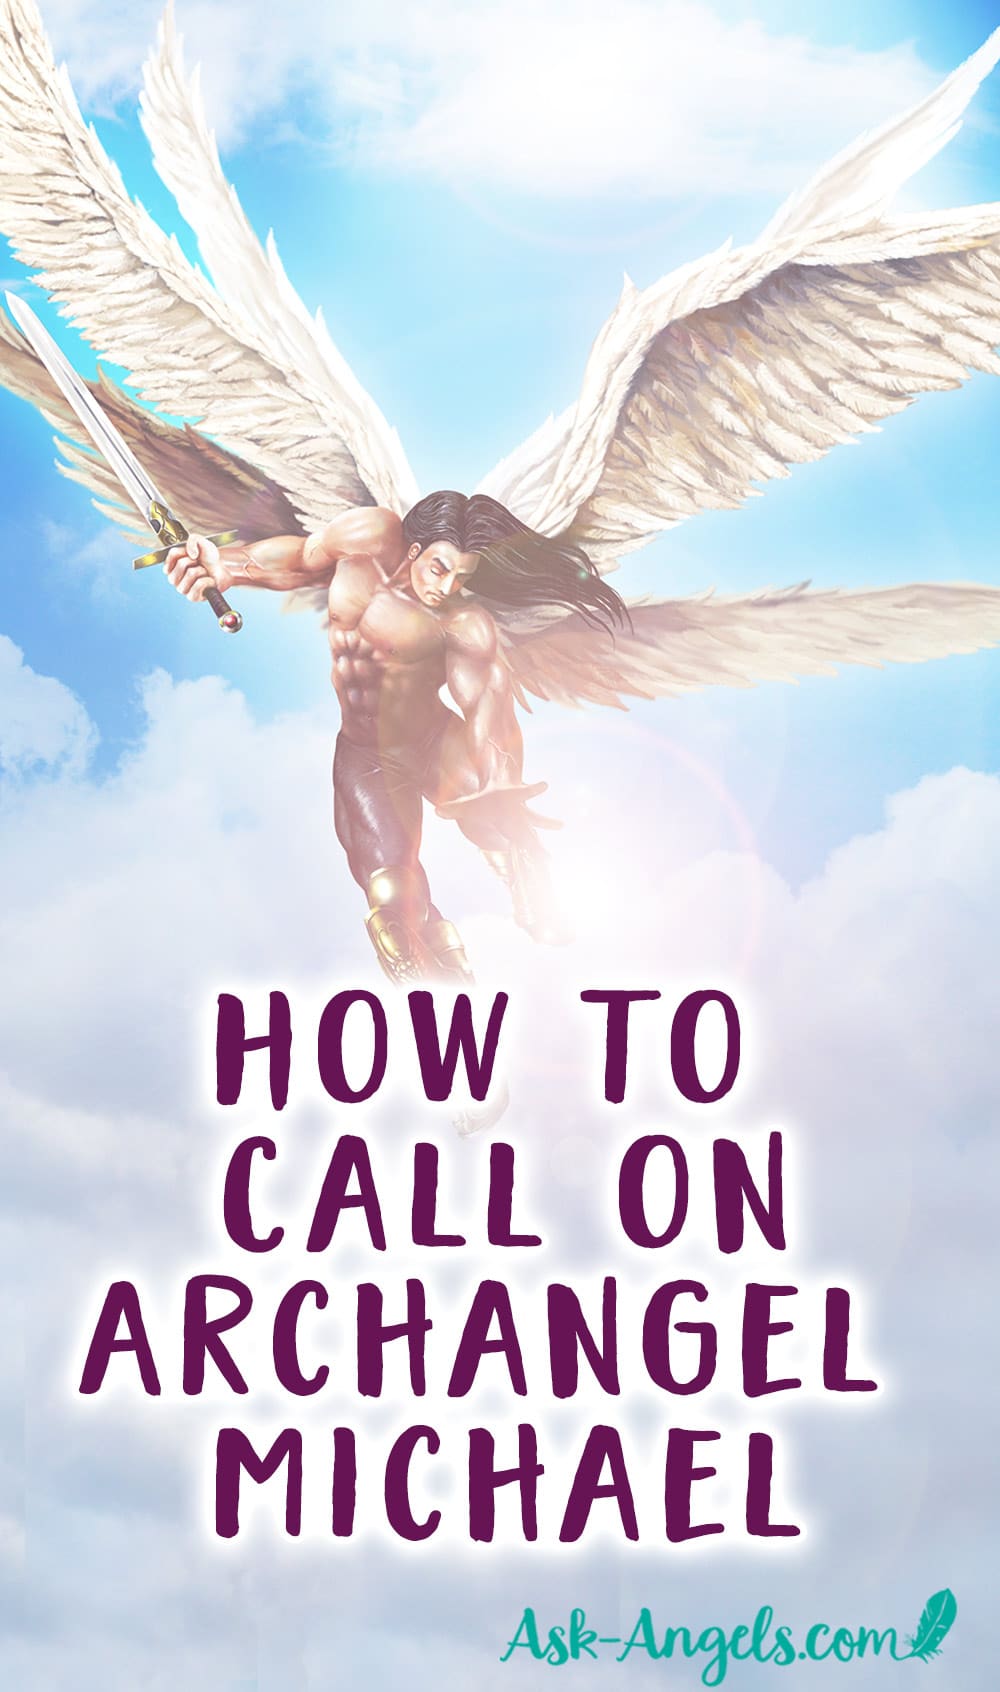 How to Call On Archangel Michael